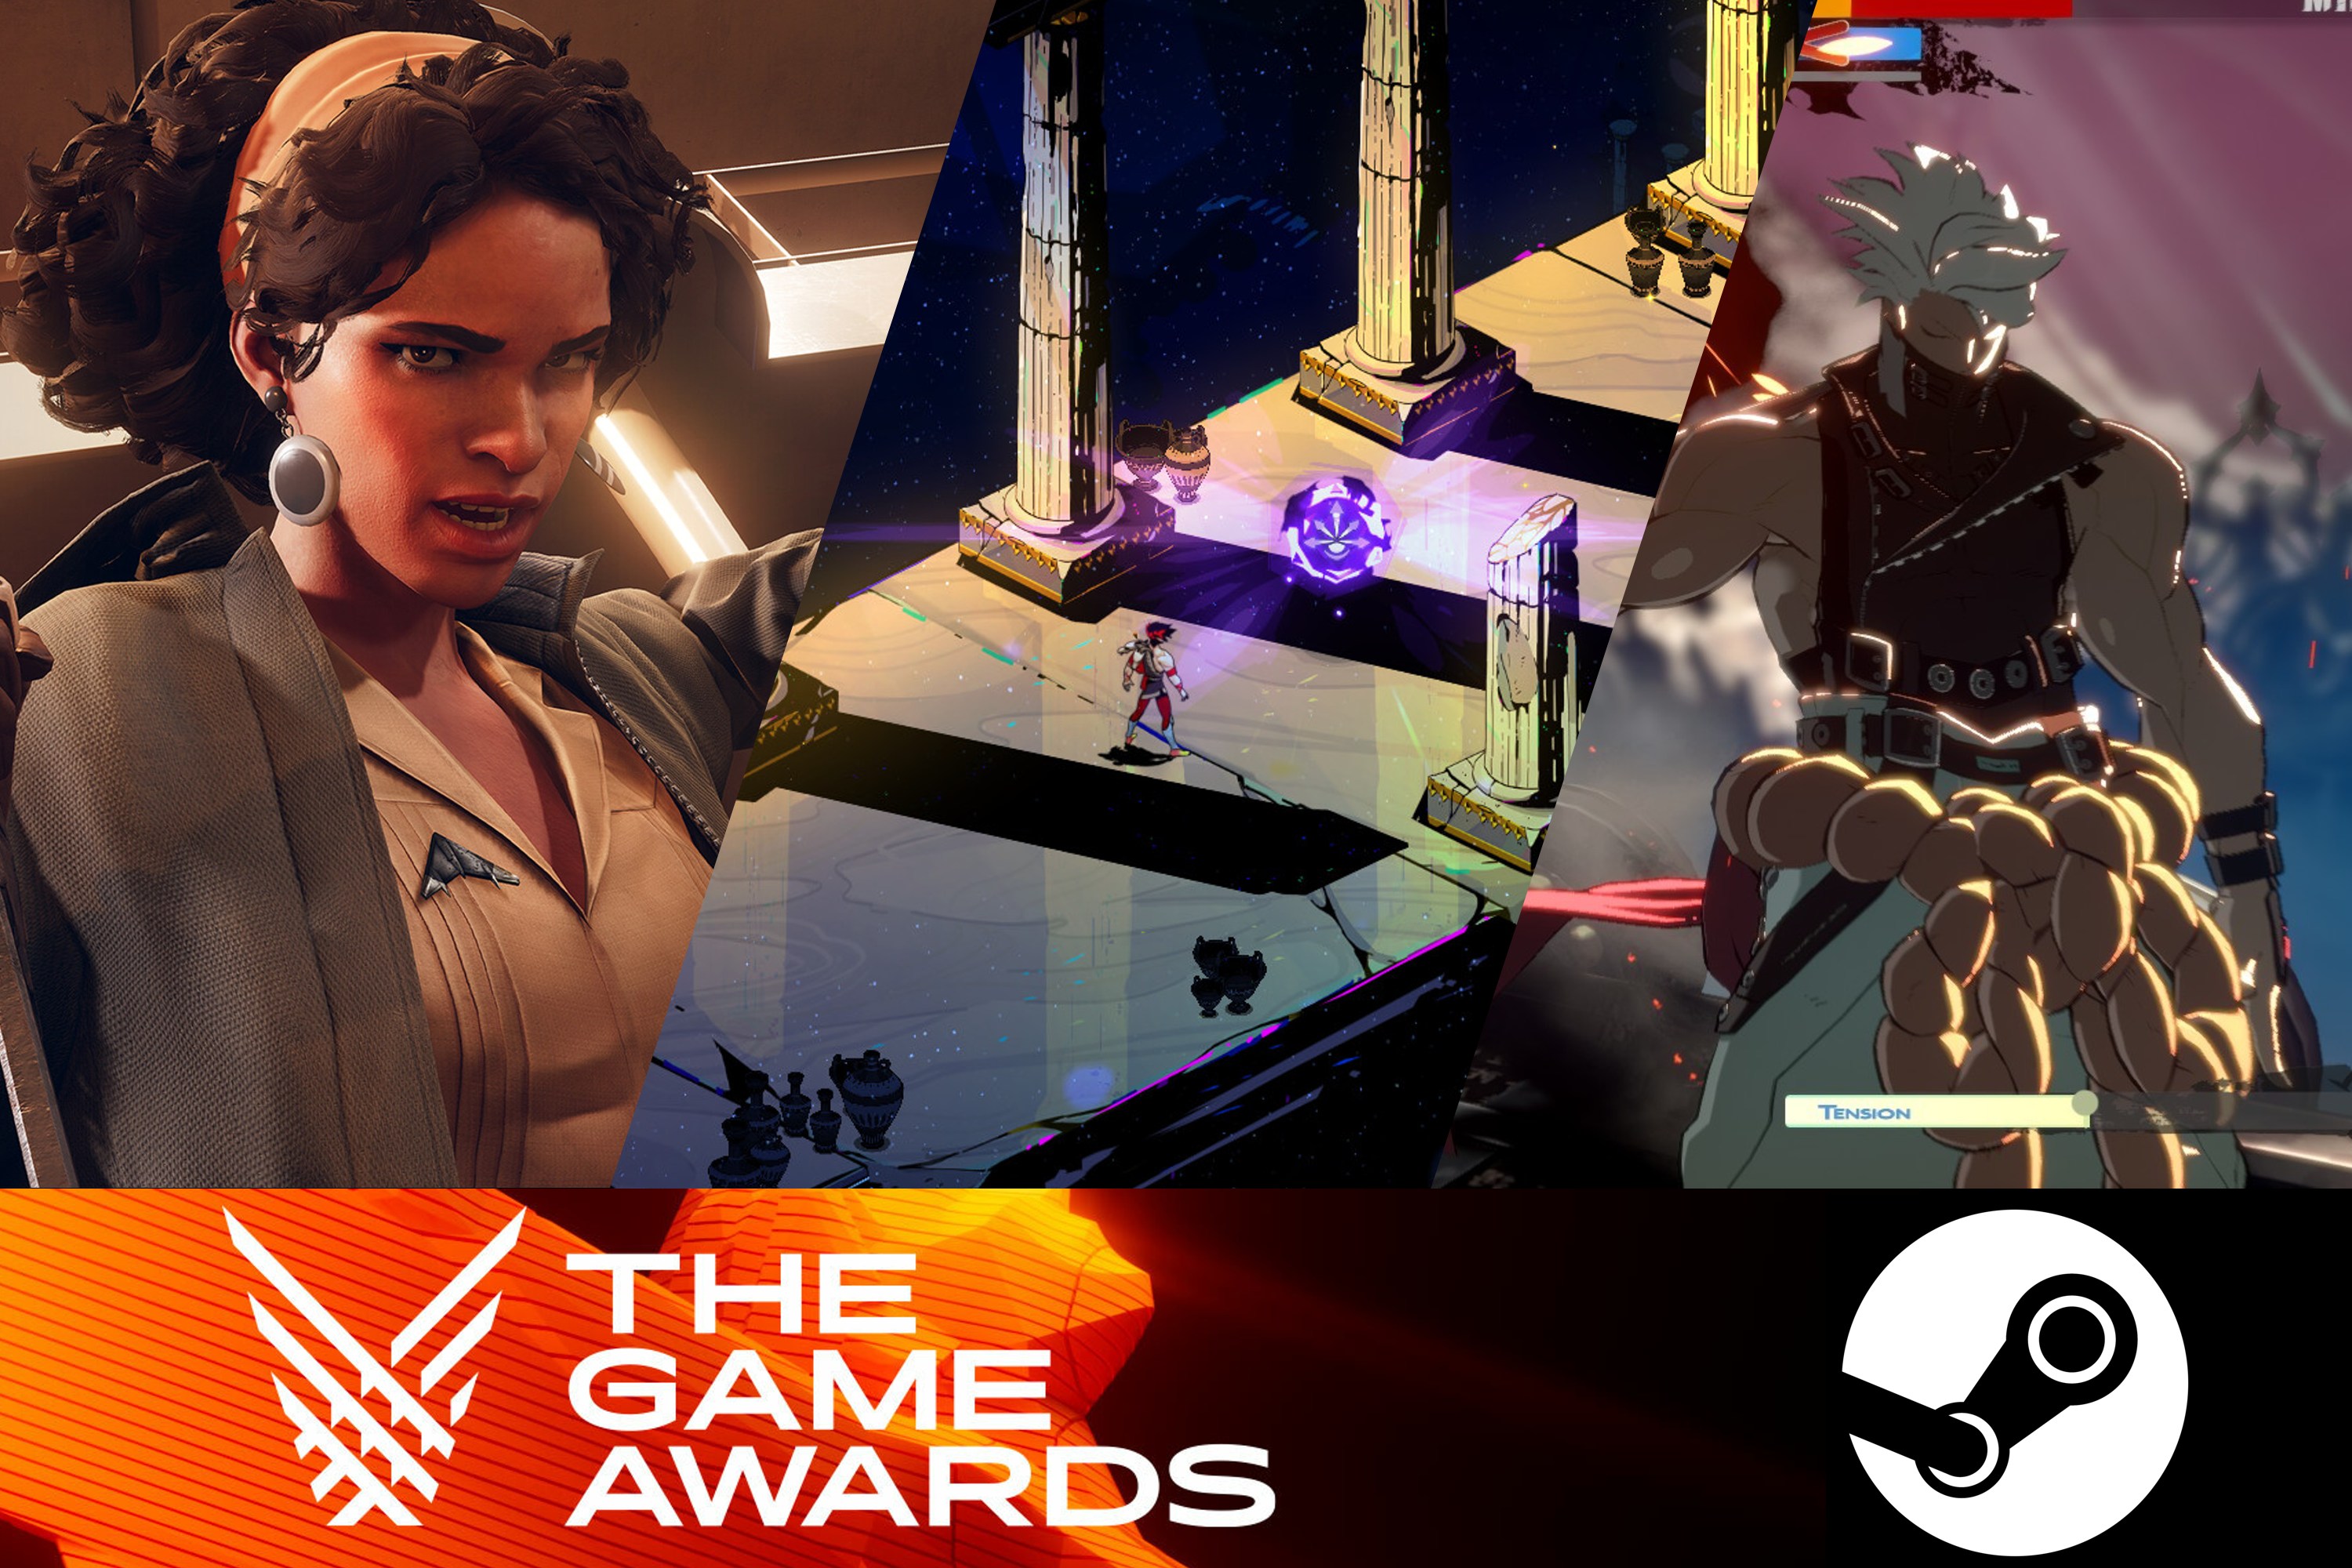 The Game Awards 2022 Steam sale 3 engaging former award winners to